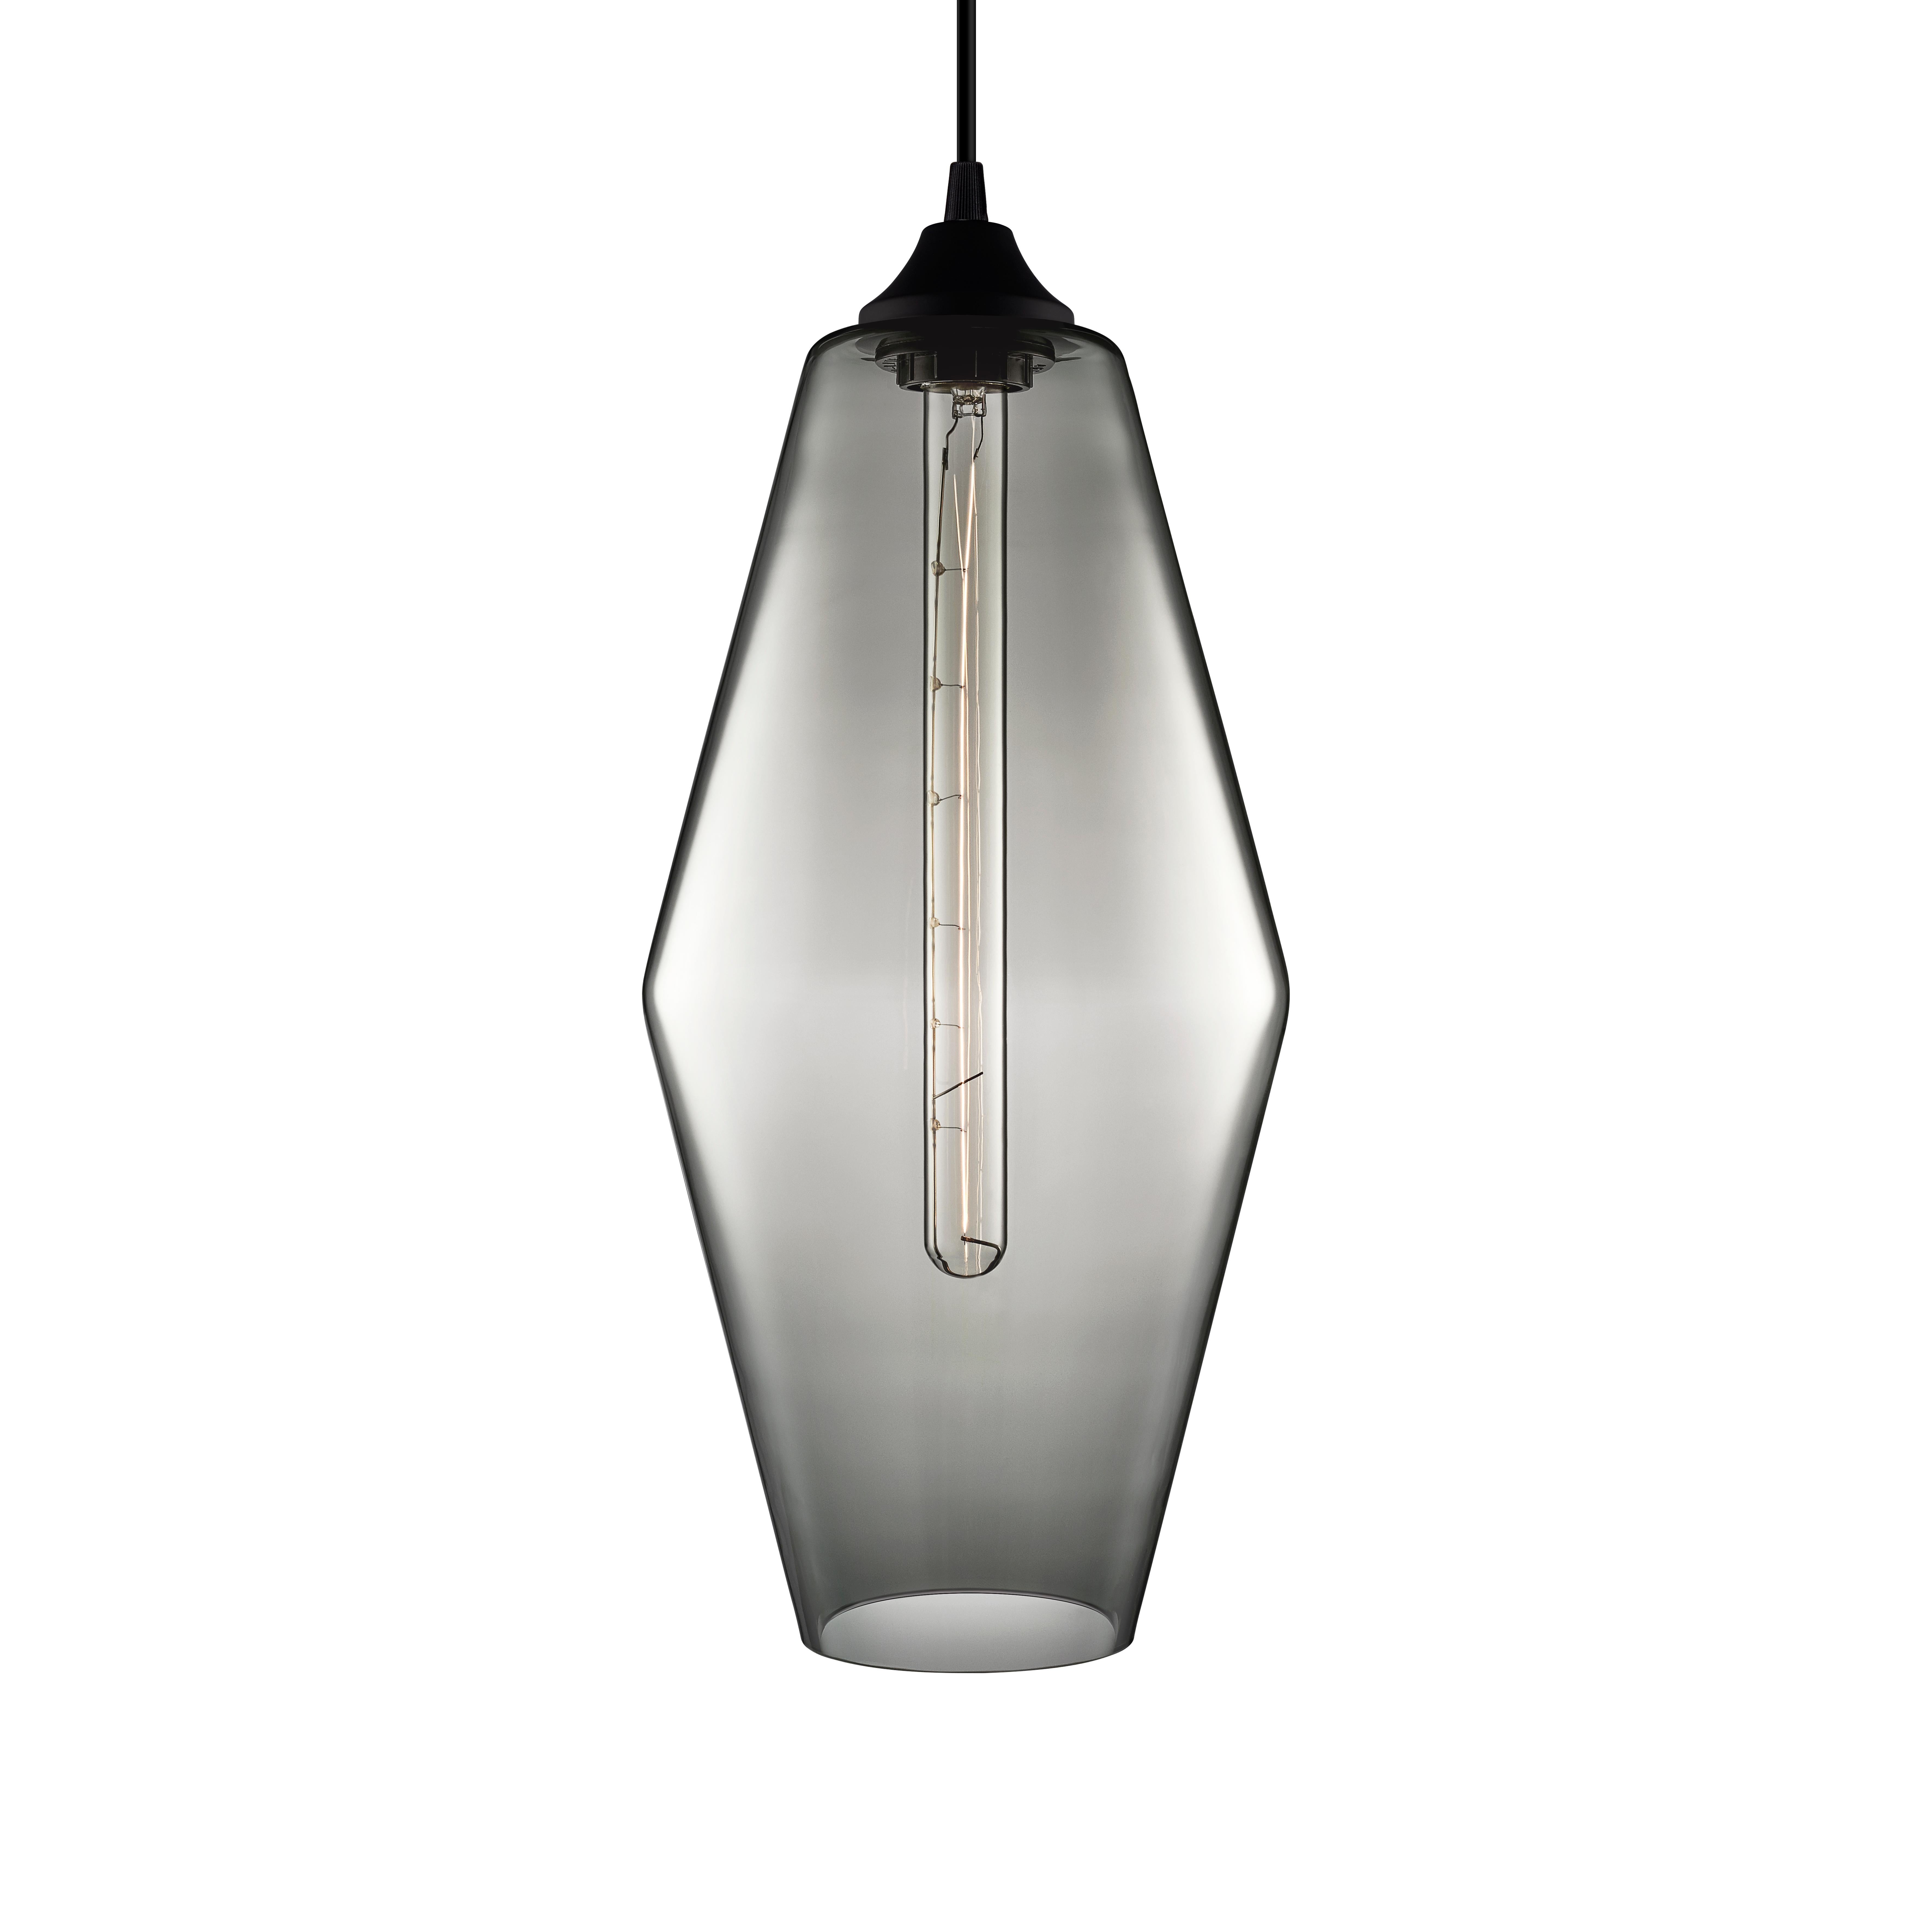 Marquise Grand Gray Handblown Modern Glass Pendant Light, Made in the USA